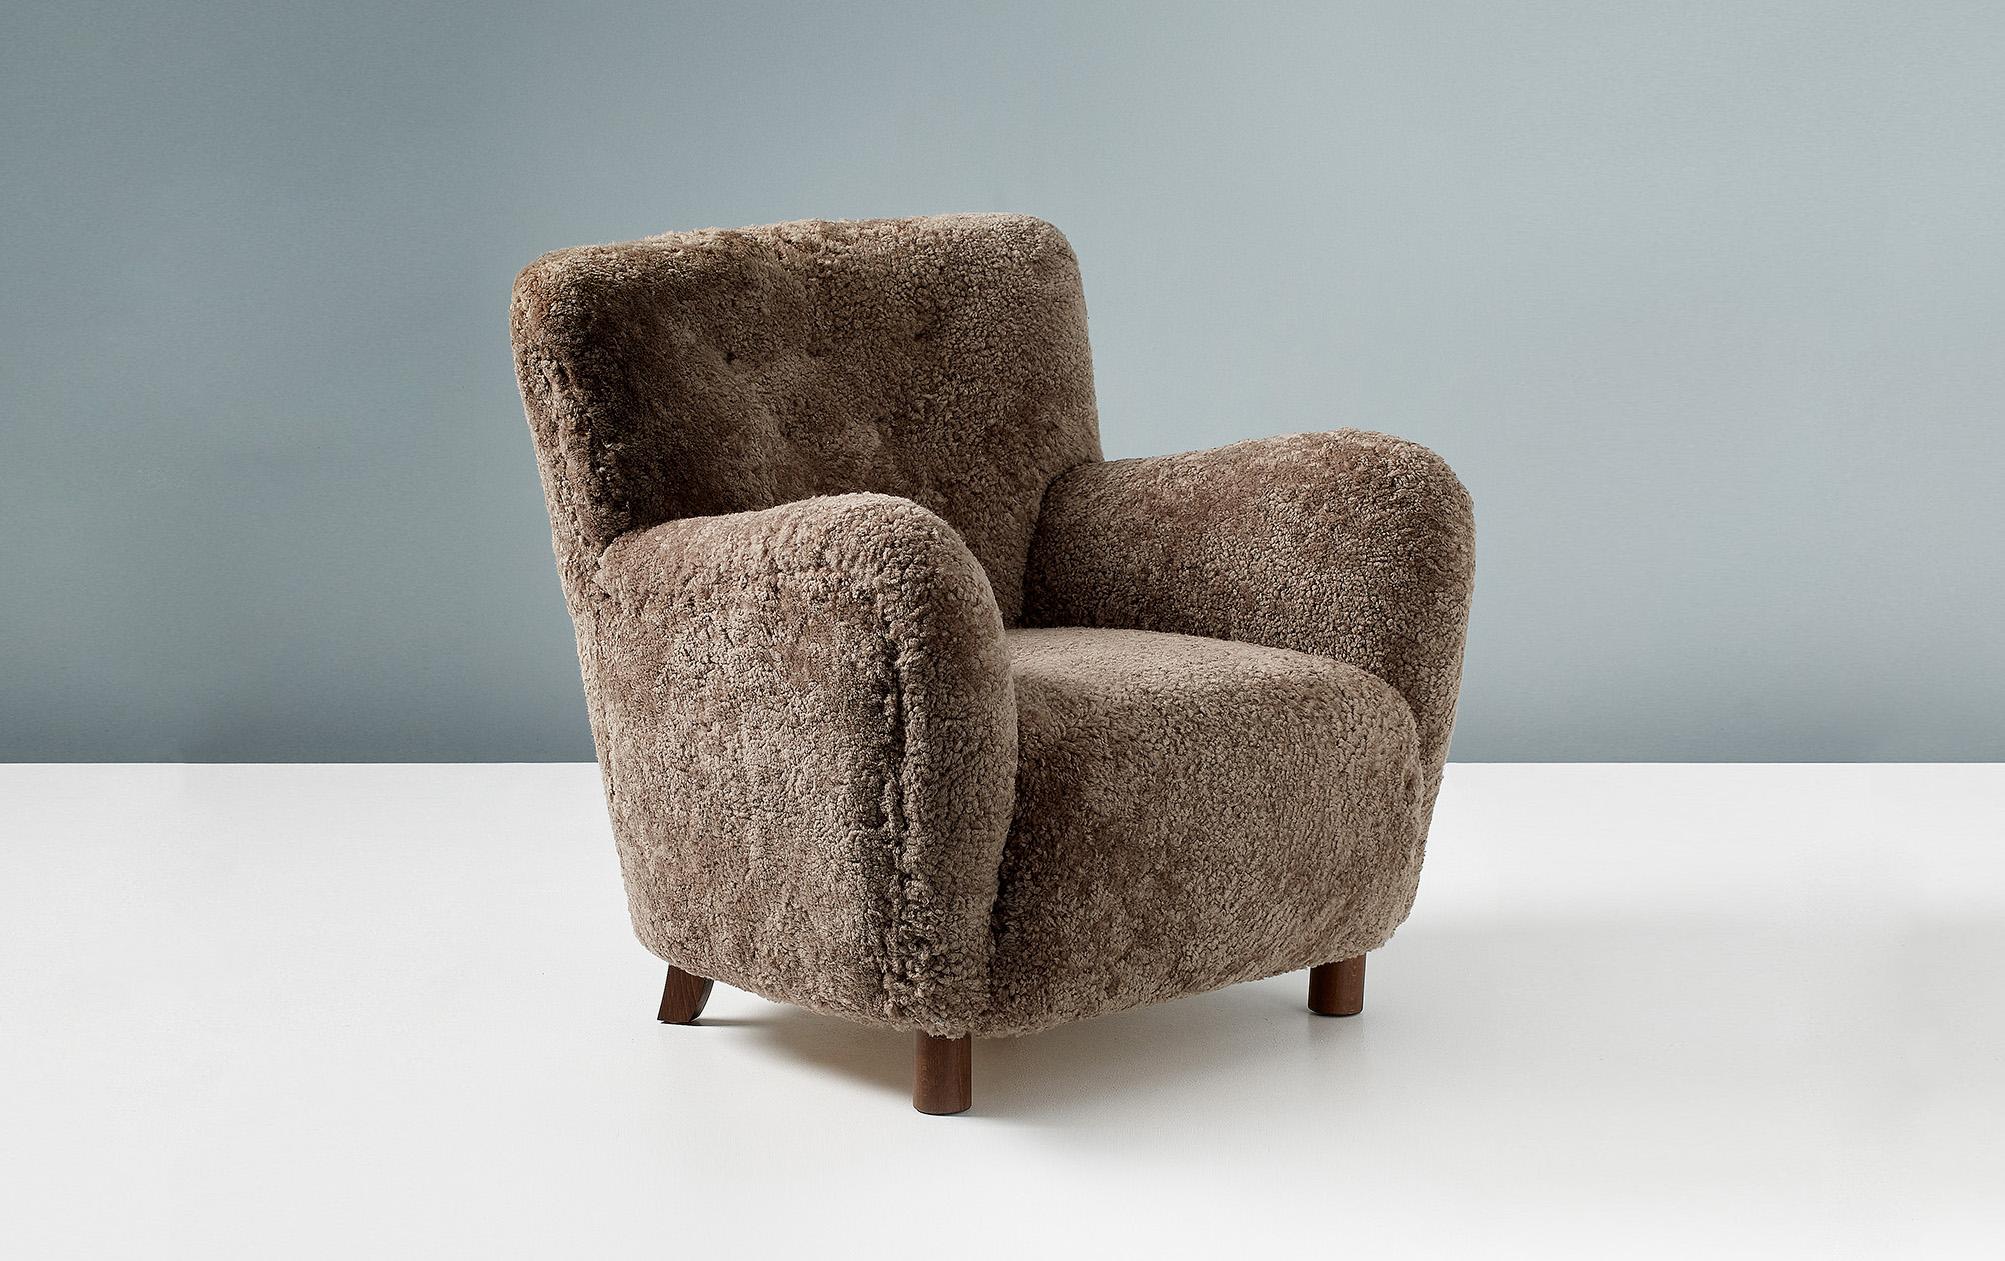 Dagmar Design

Model 54 lounge chair

A custom made lounge chair developed and hand-made at our workshops in London using the highest quality materials. The 54 chair is available to order in a range of different shearling colours and fabrics